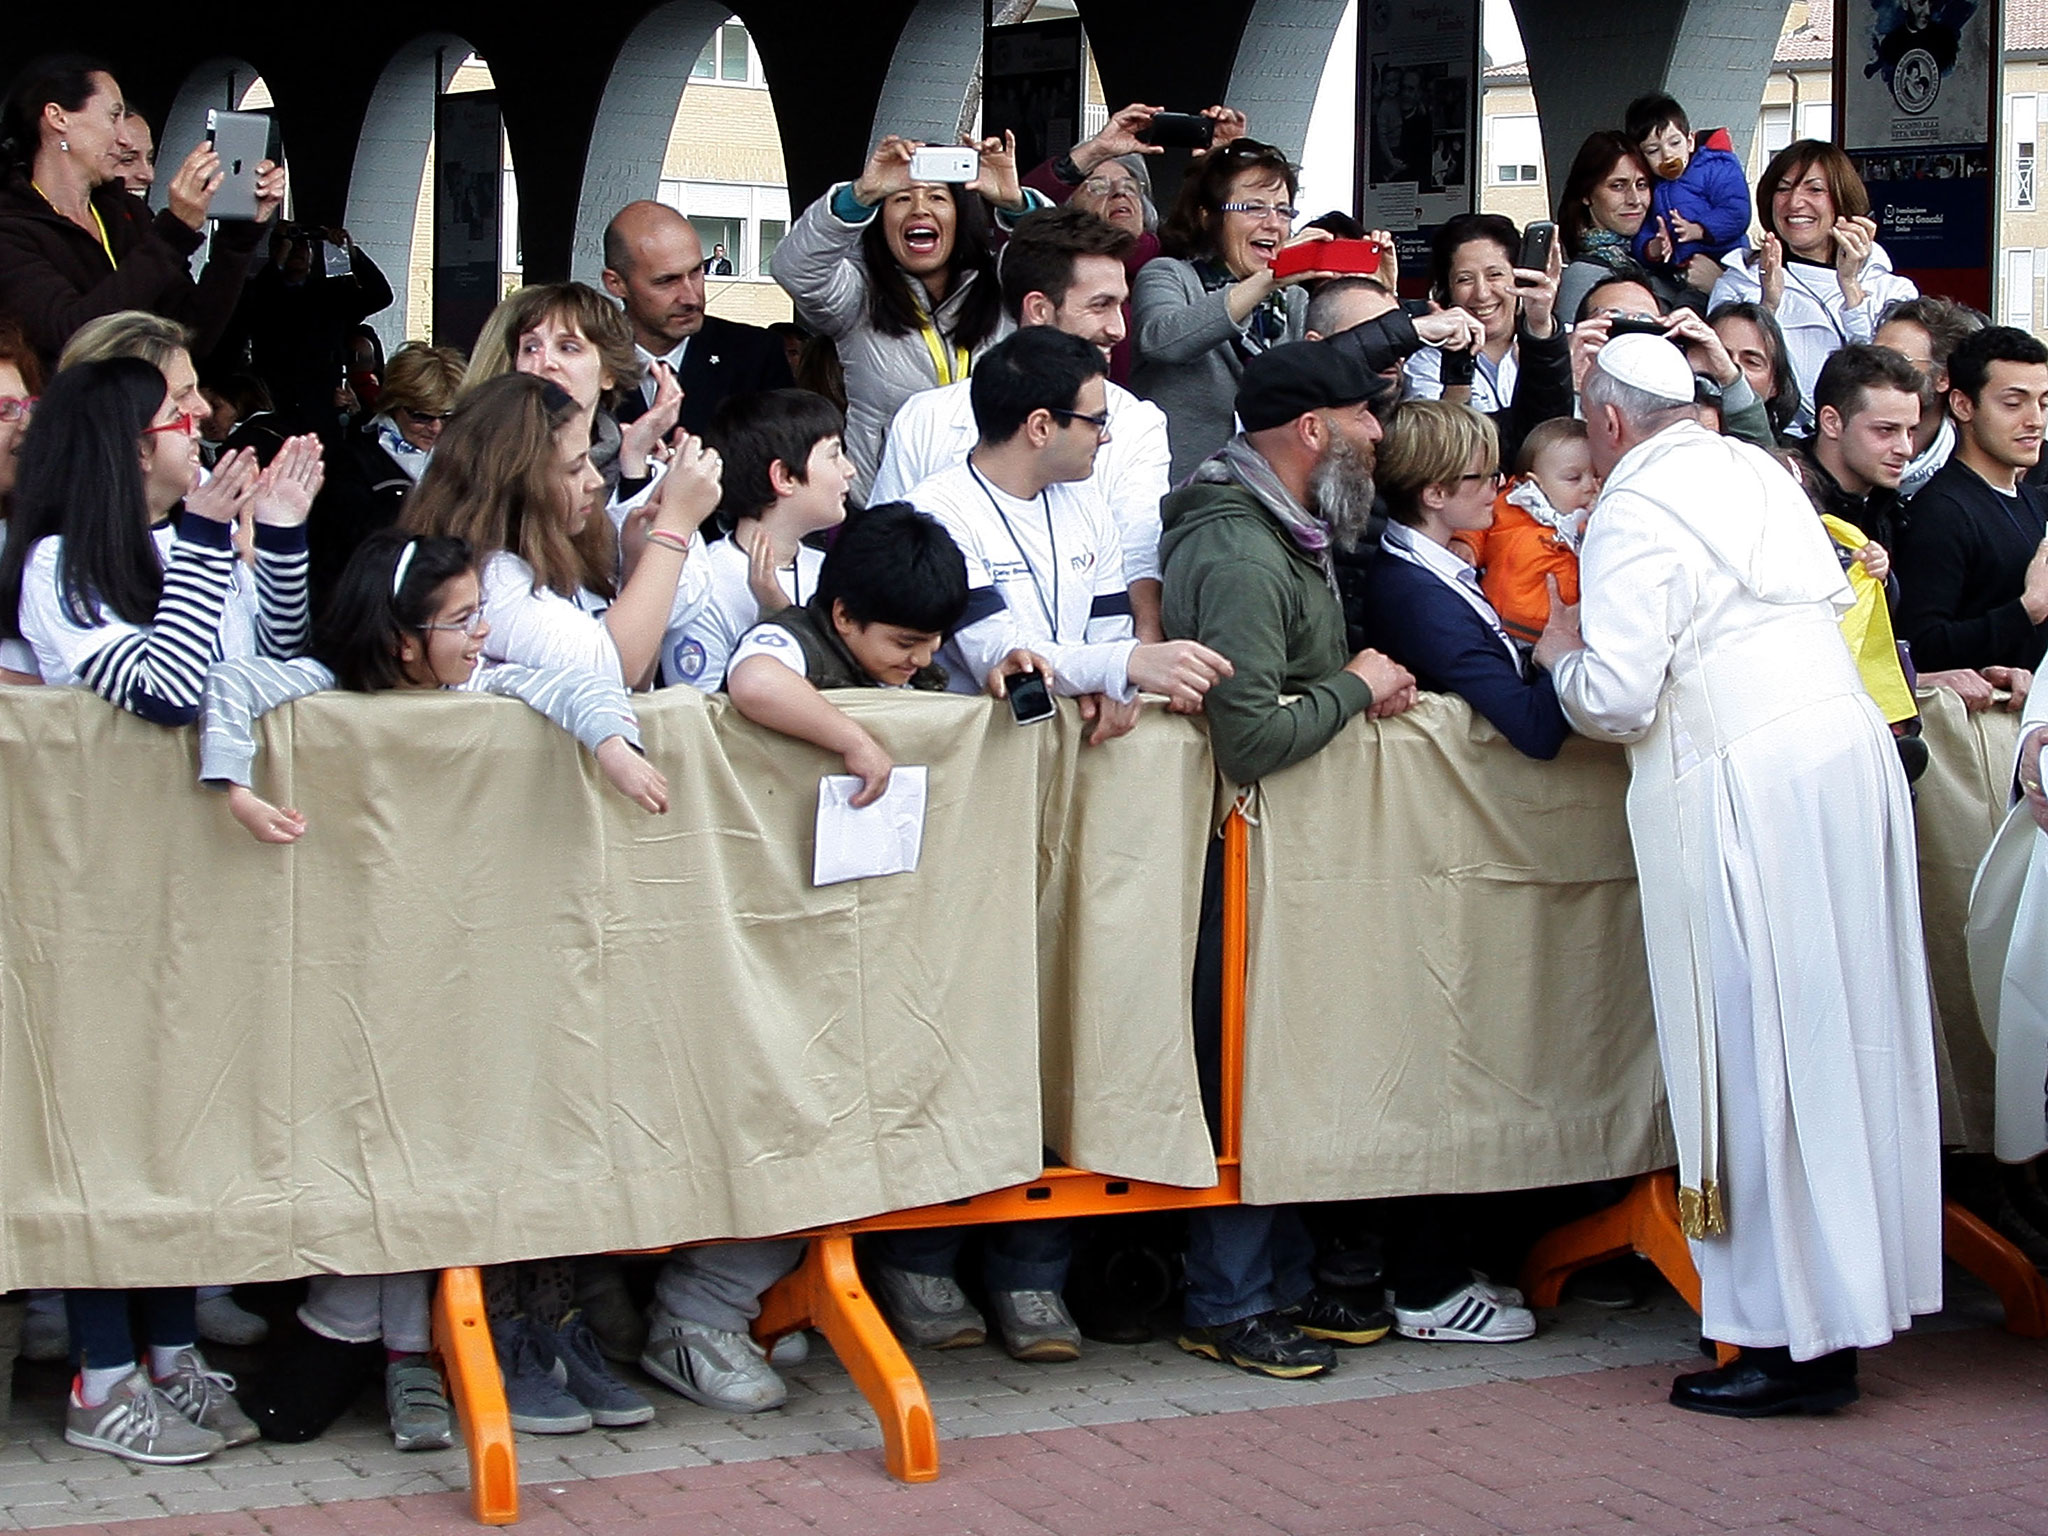 Pope Francis greets the faithful as he arrives at the Don Gnocchi Centre for the elderly and disabled for the Maundy Thursday Mass on April 17, 2014 in Rome.
